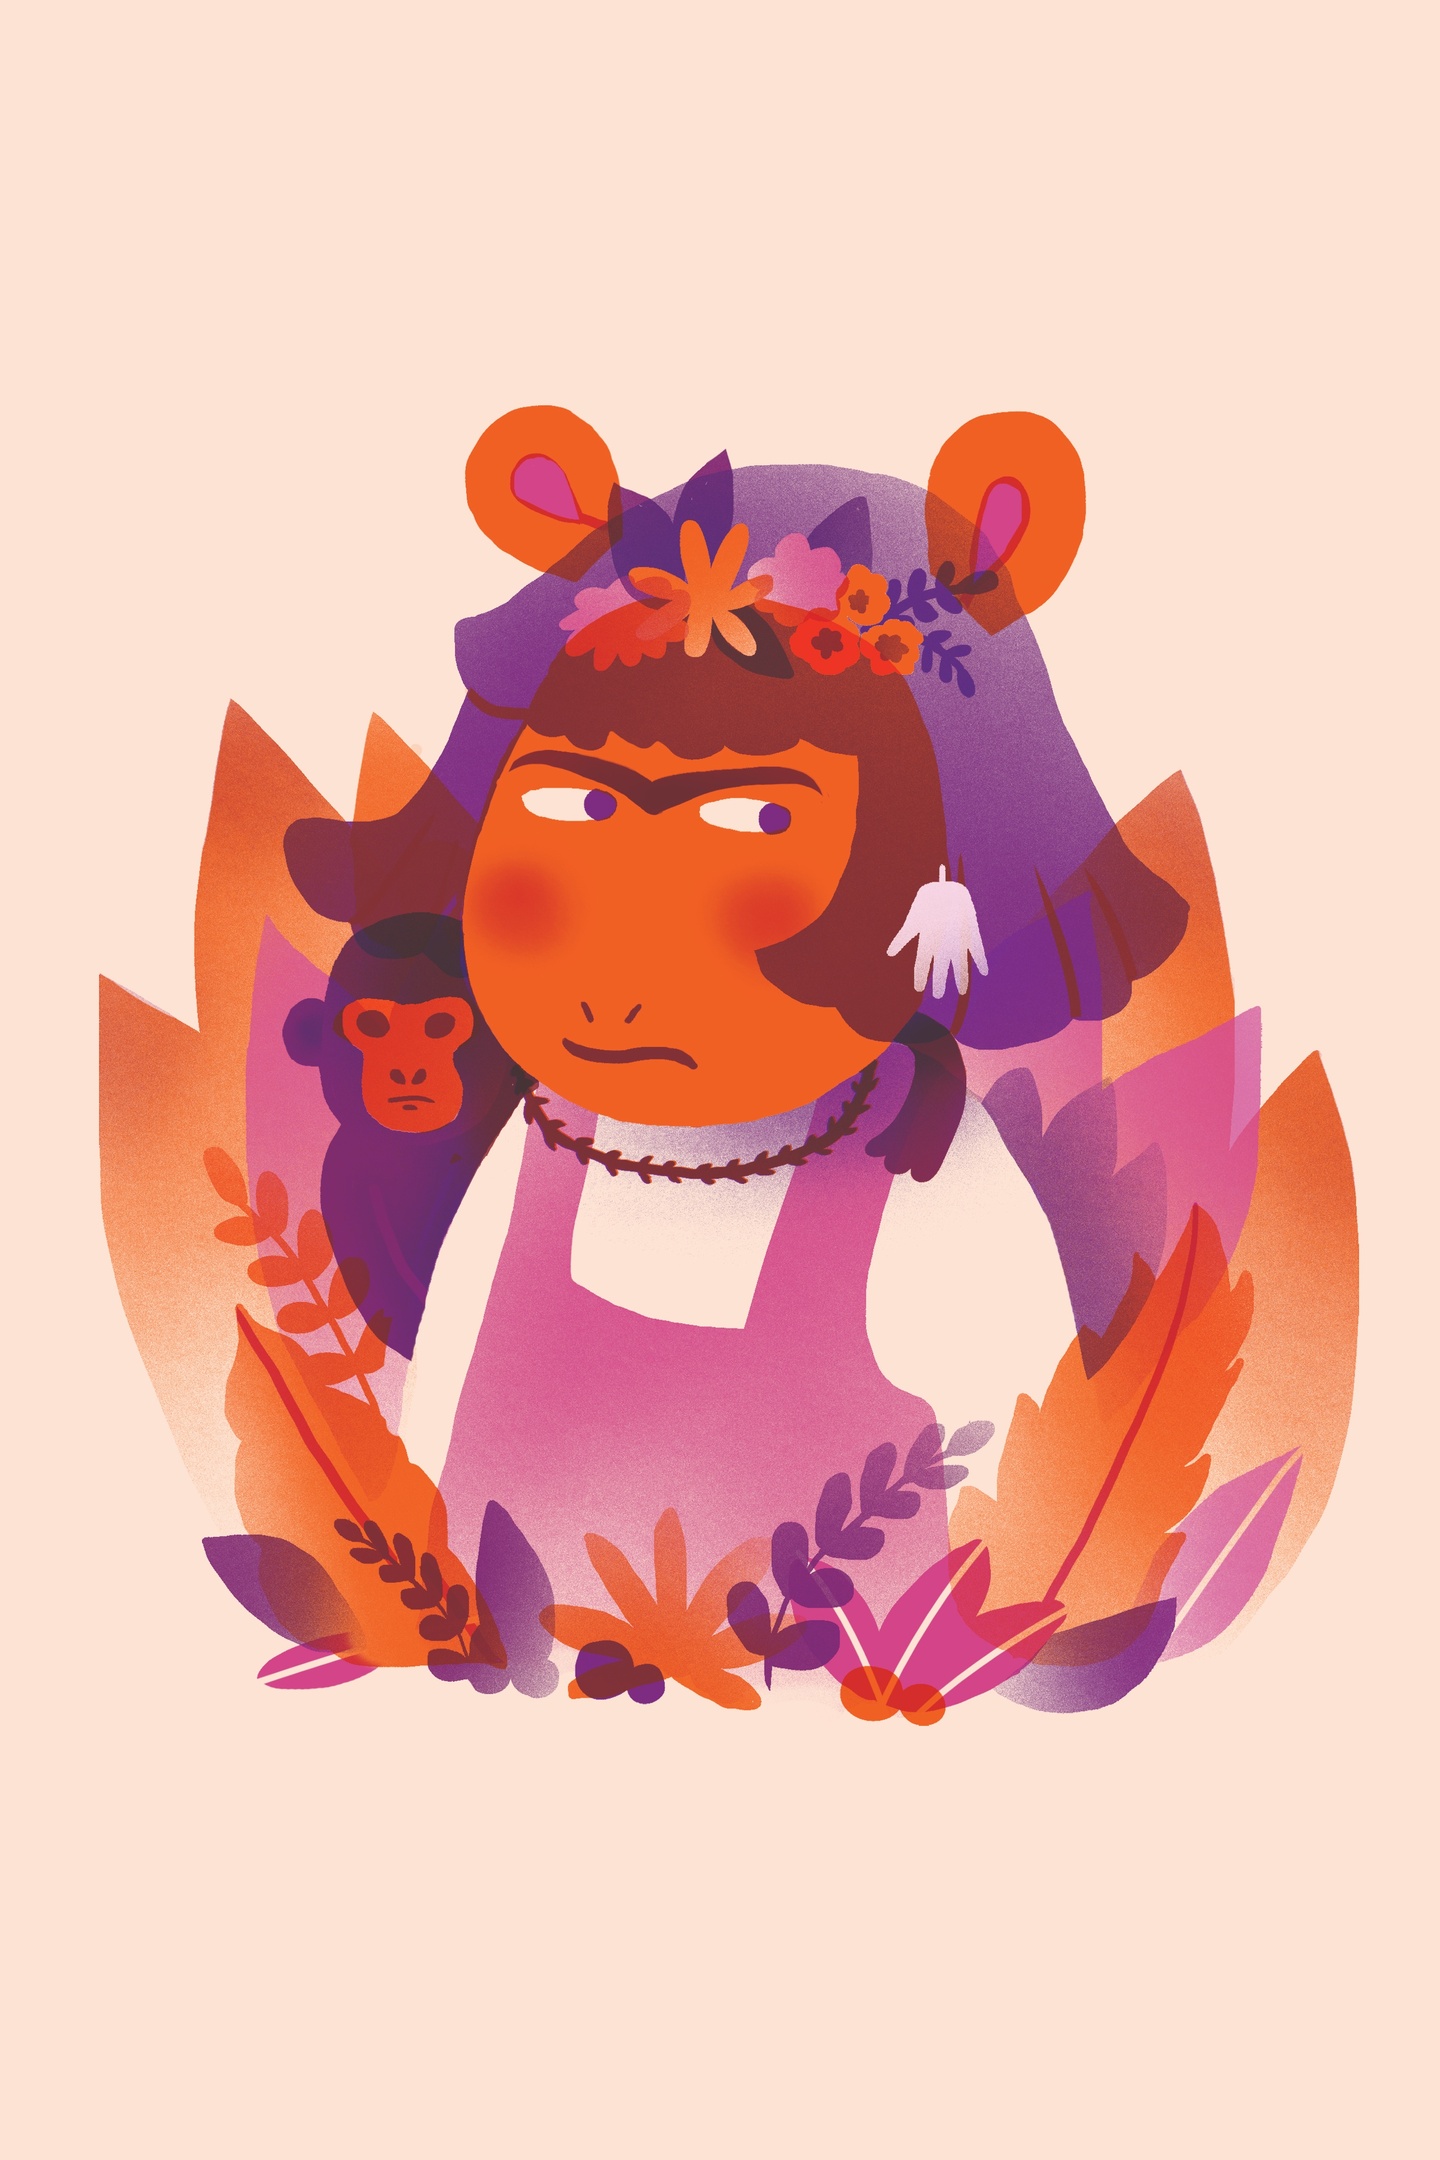 Illustration of scowling DW from "Arthur" book and television series in vibrant reds and purples surrounded by botanical shapes. DW has a unibrow and flowers in her hair and a monkey peeks out behind her shoulder.